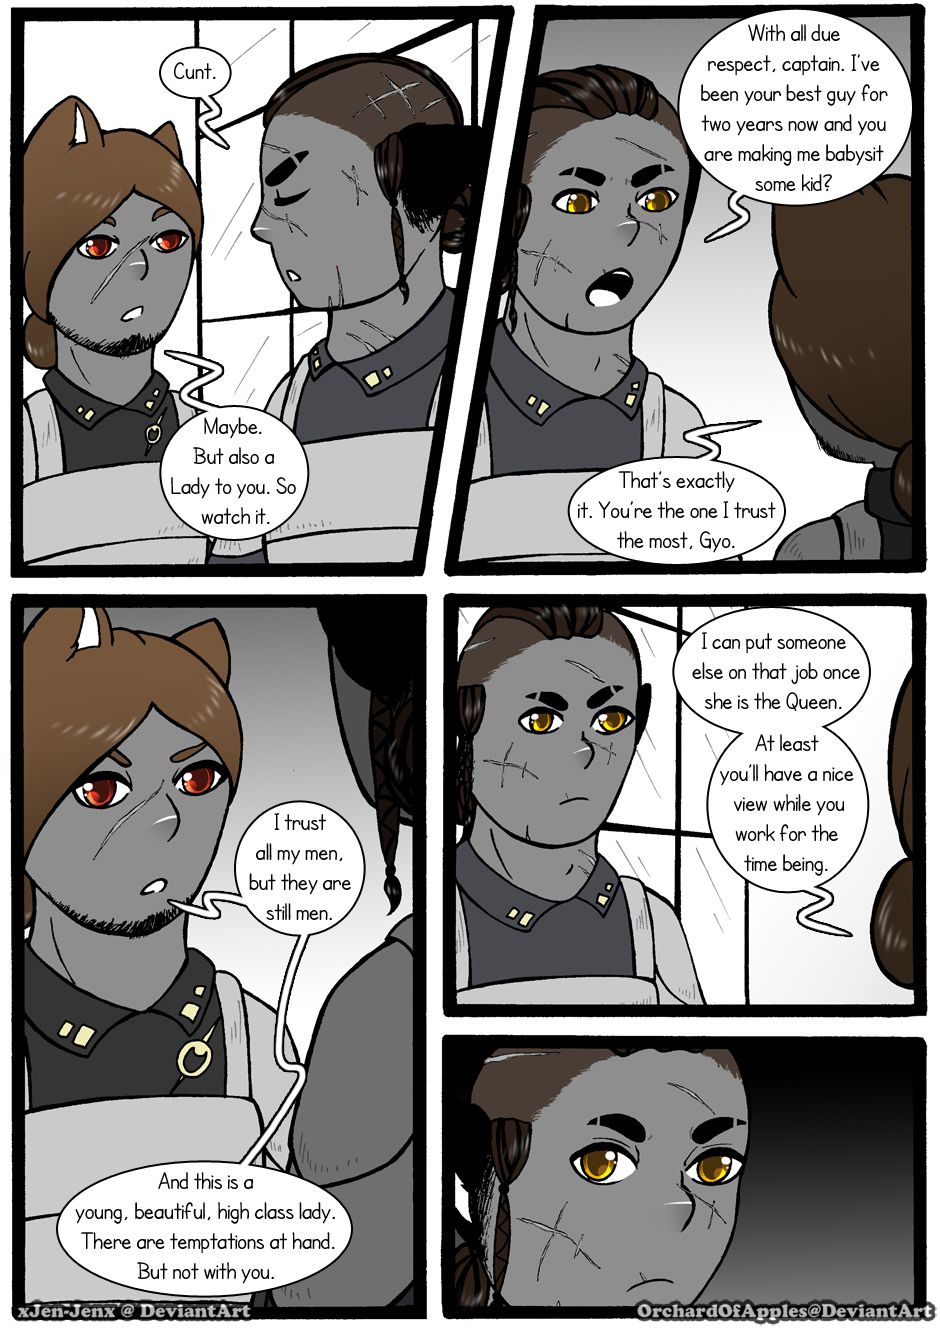 [Jeny-jen94] Between Kings and Queens [Ongoing] 41